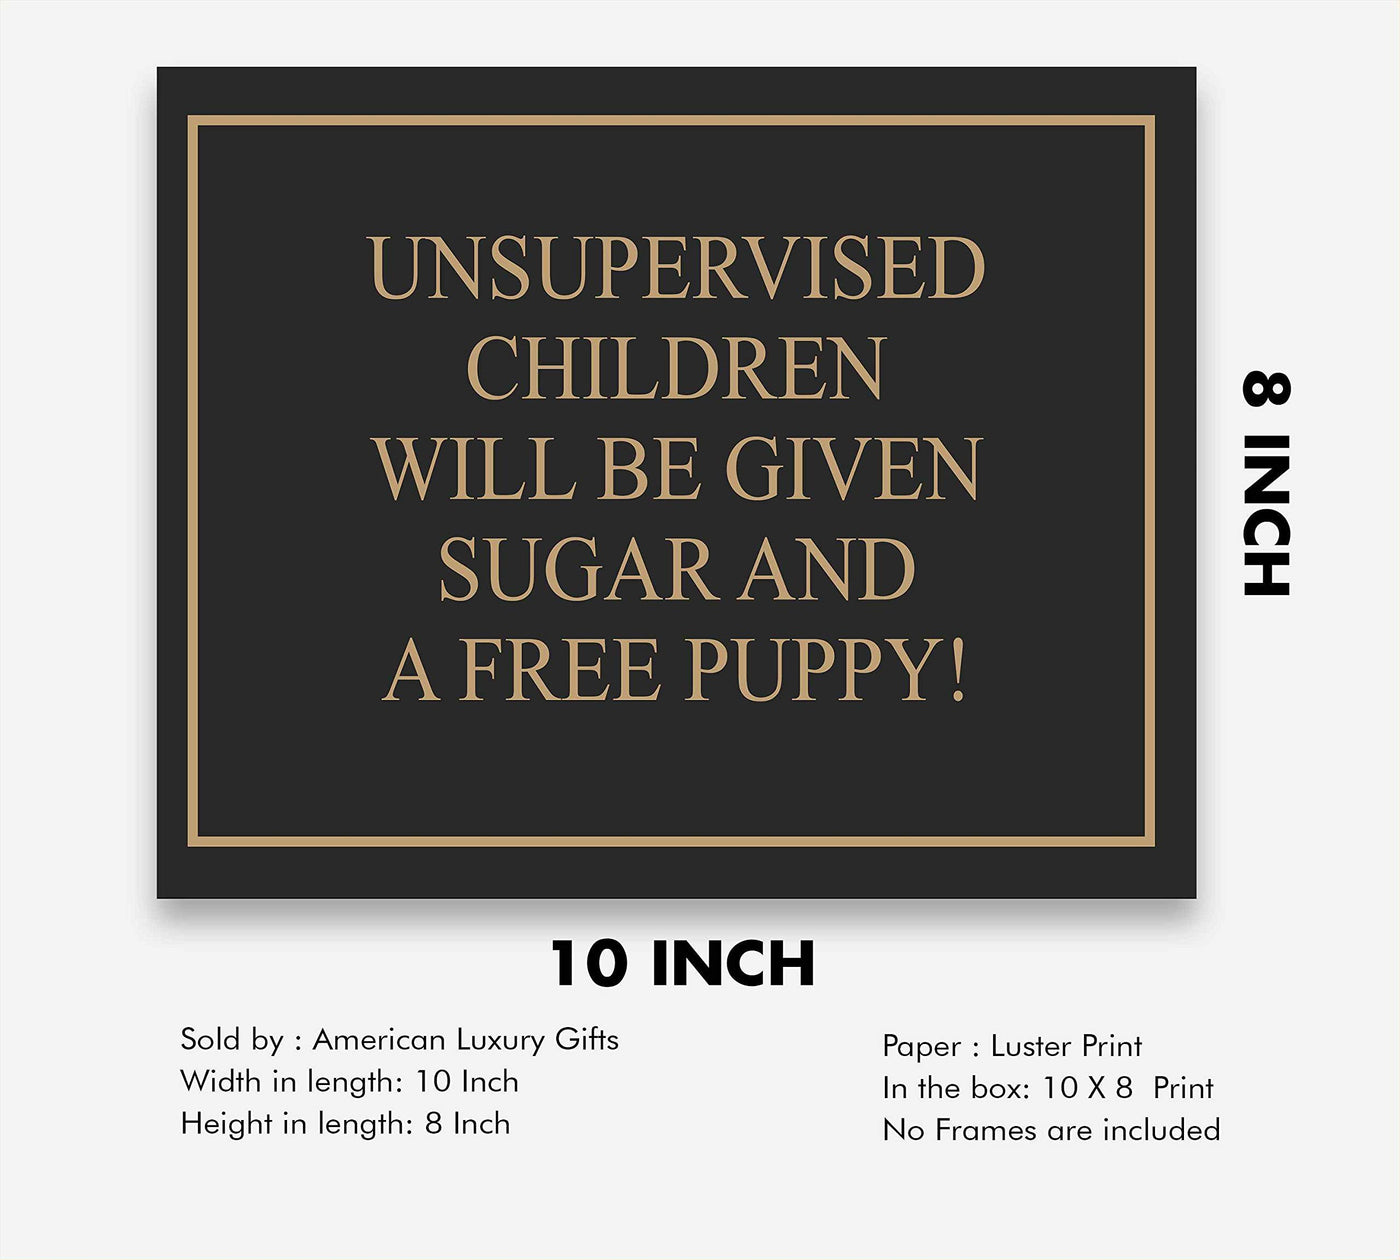 Unsupervised Children Given Sugar and Free Puppy- Funny Sign Poster Print- 10 x 8" -Ready to Frame. Humorous Wall Print Ideal for Home-Office-Studio-Man Cave-Garage Decor. Perfect Novelty Gift!